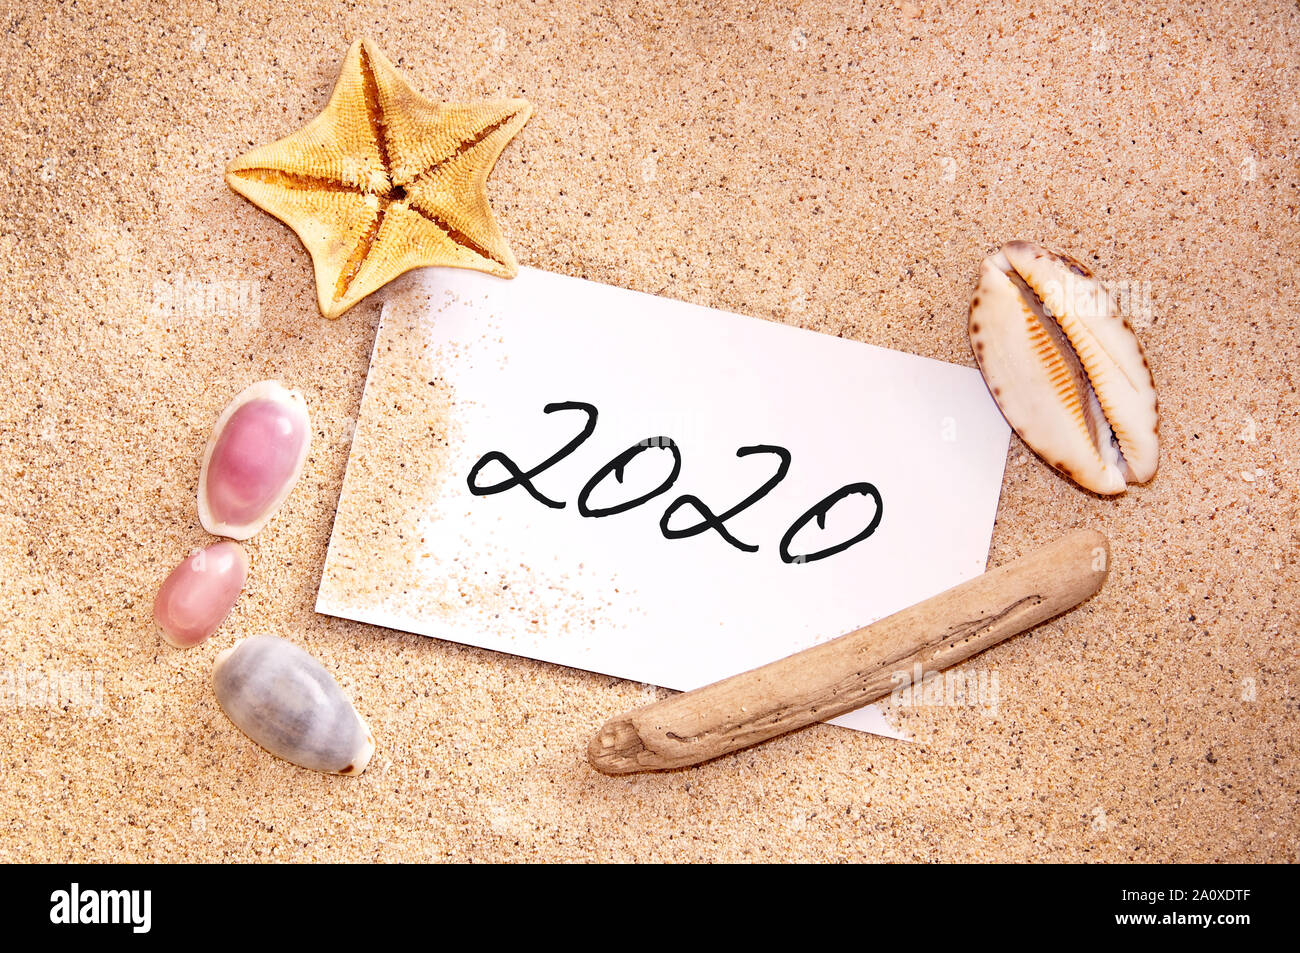 2020 written on a note in the sand of a beach with seashells, tropical vacations, new year holiday card Stock Photo